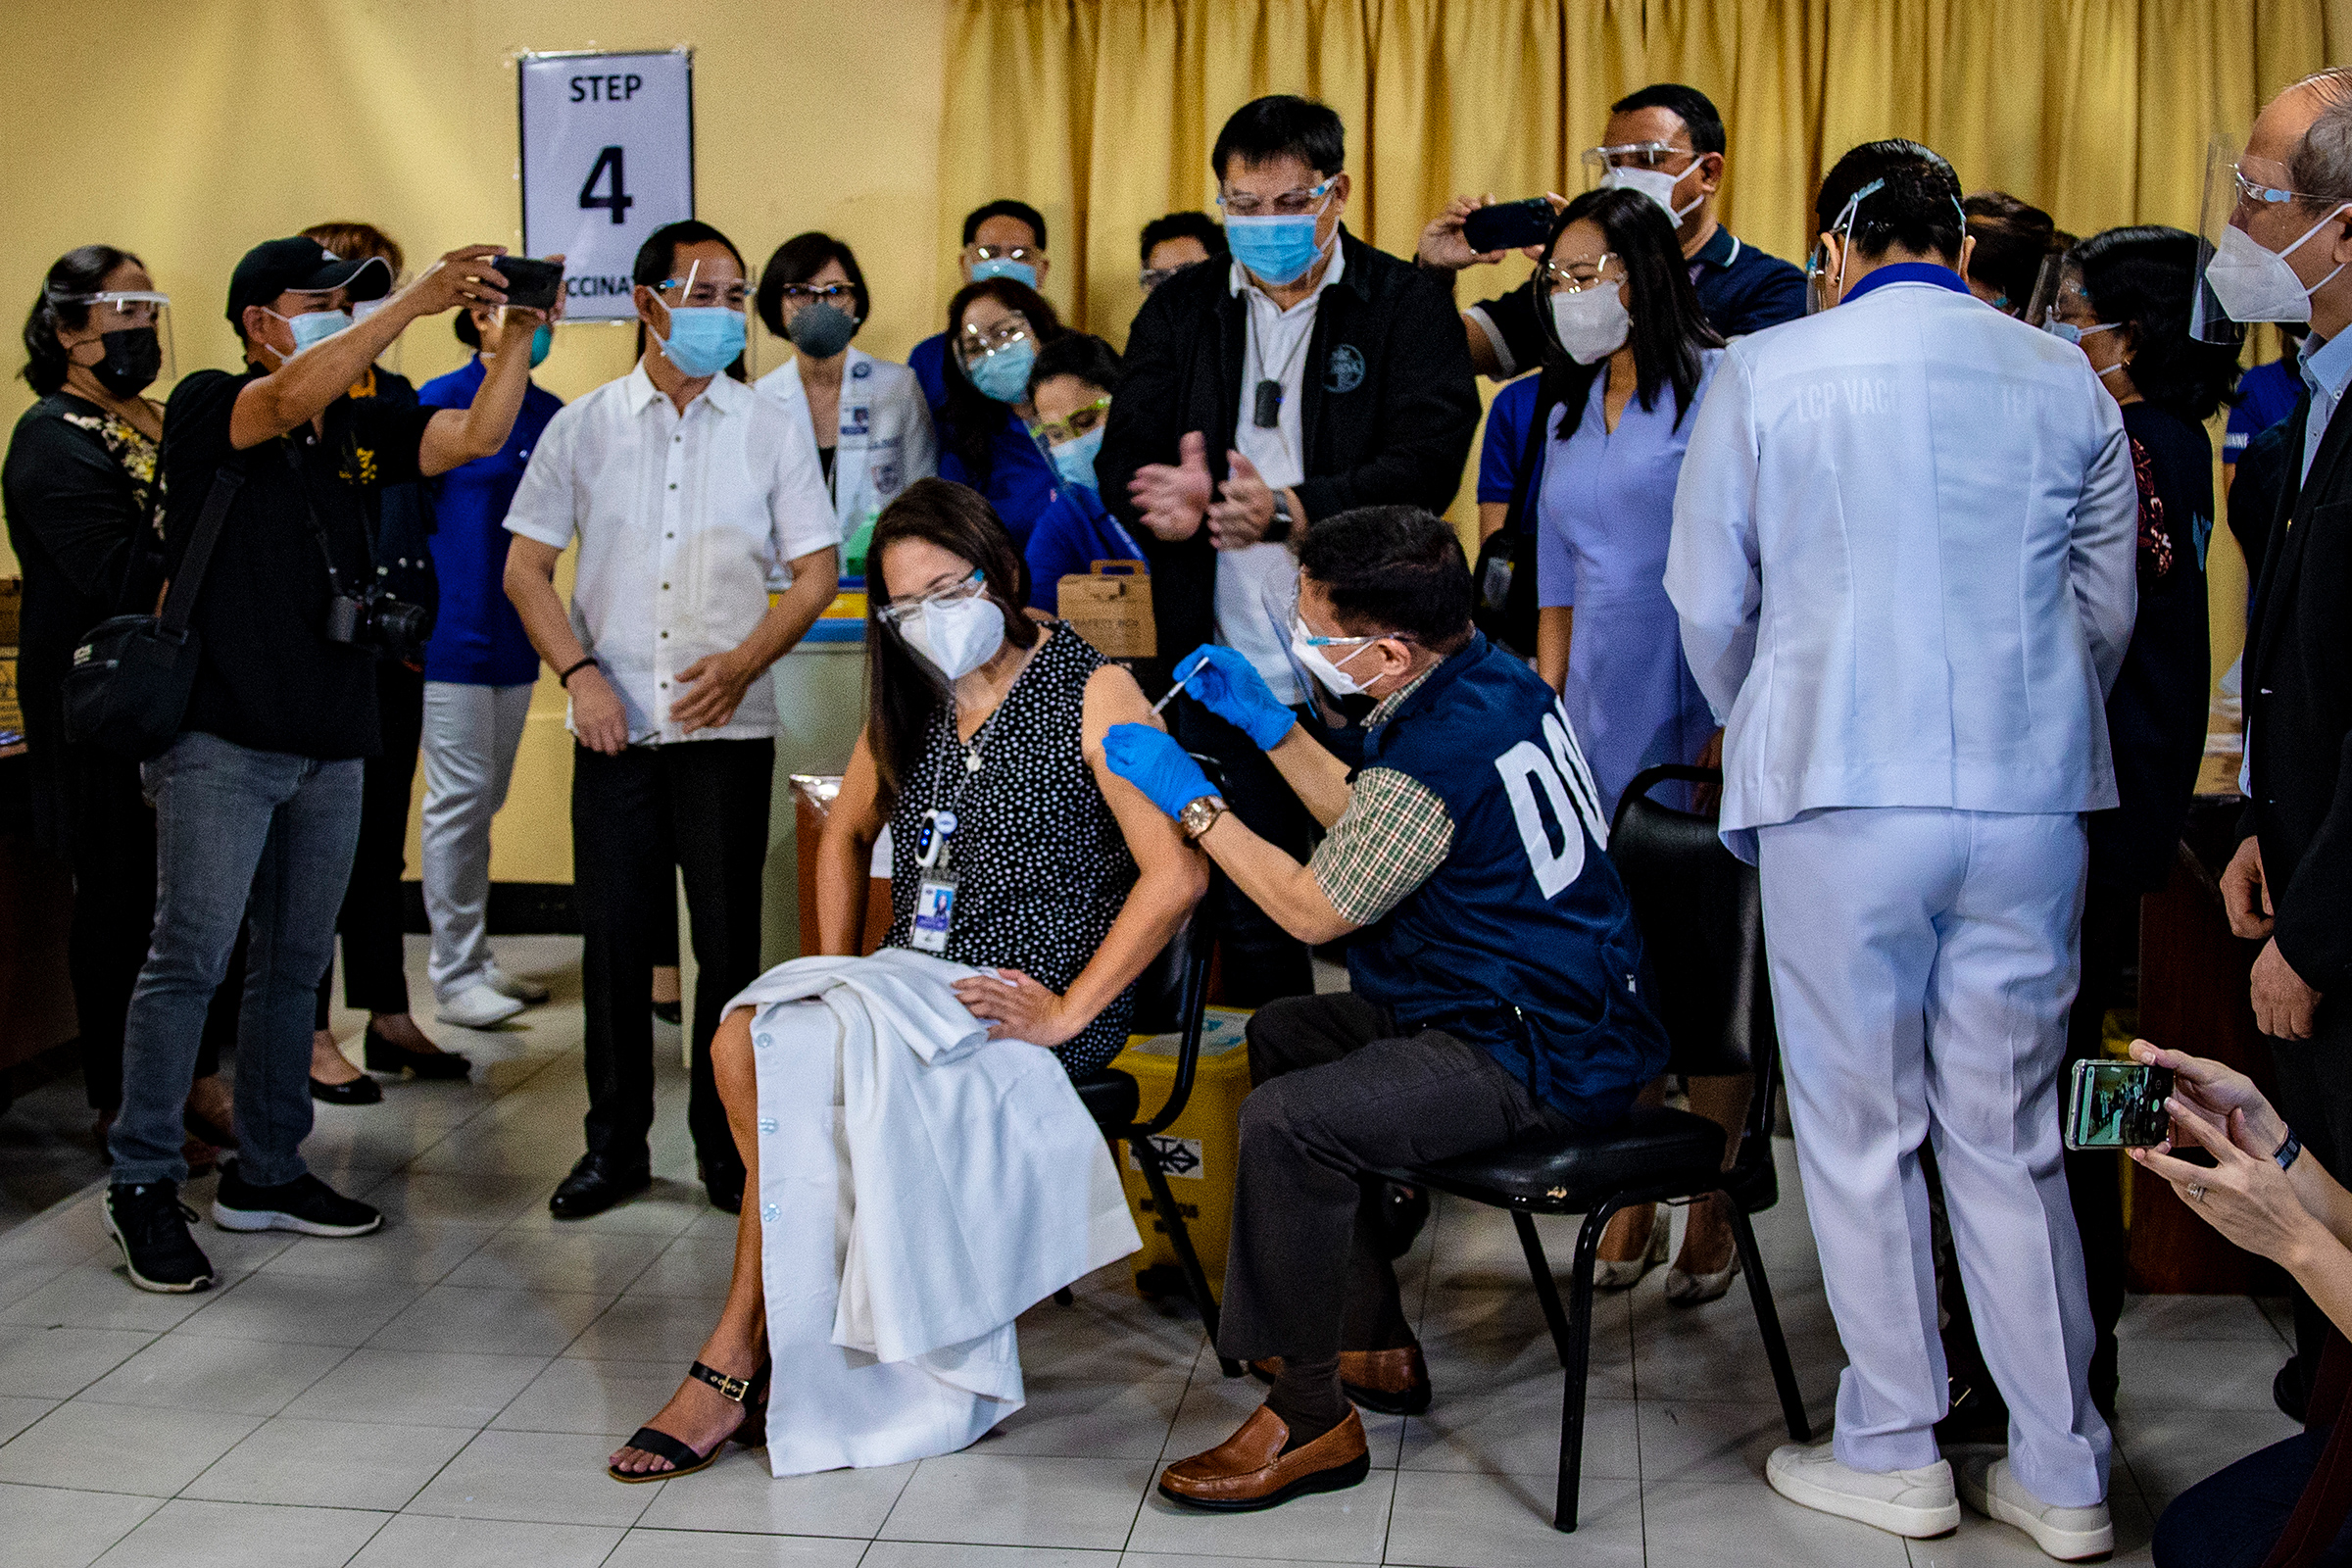 Health Secretary Francisco Duque III administers a shot of Sinovac Biotech's CoronaVac vaccine on a health care worker during the first day of COVID-19 vaccinations at the Lung Center of the Philippines Hospital in Quezon City on March 1. (Ezra Acayan—Getty Images)